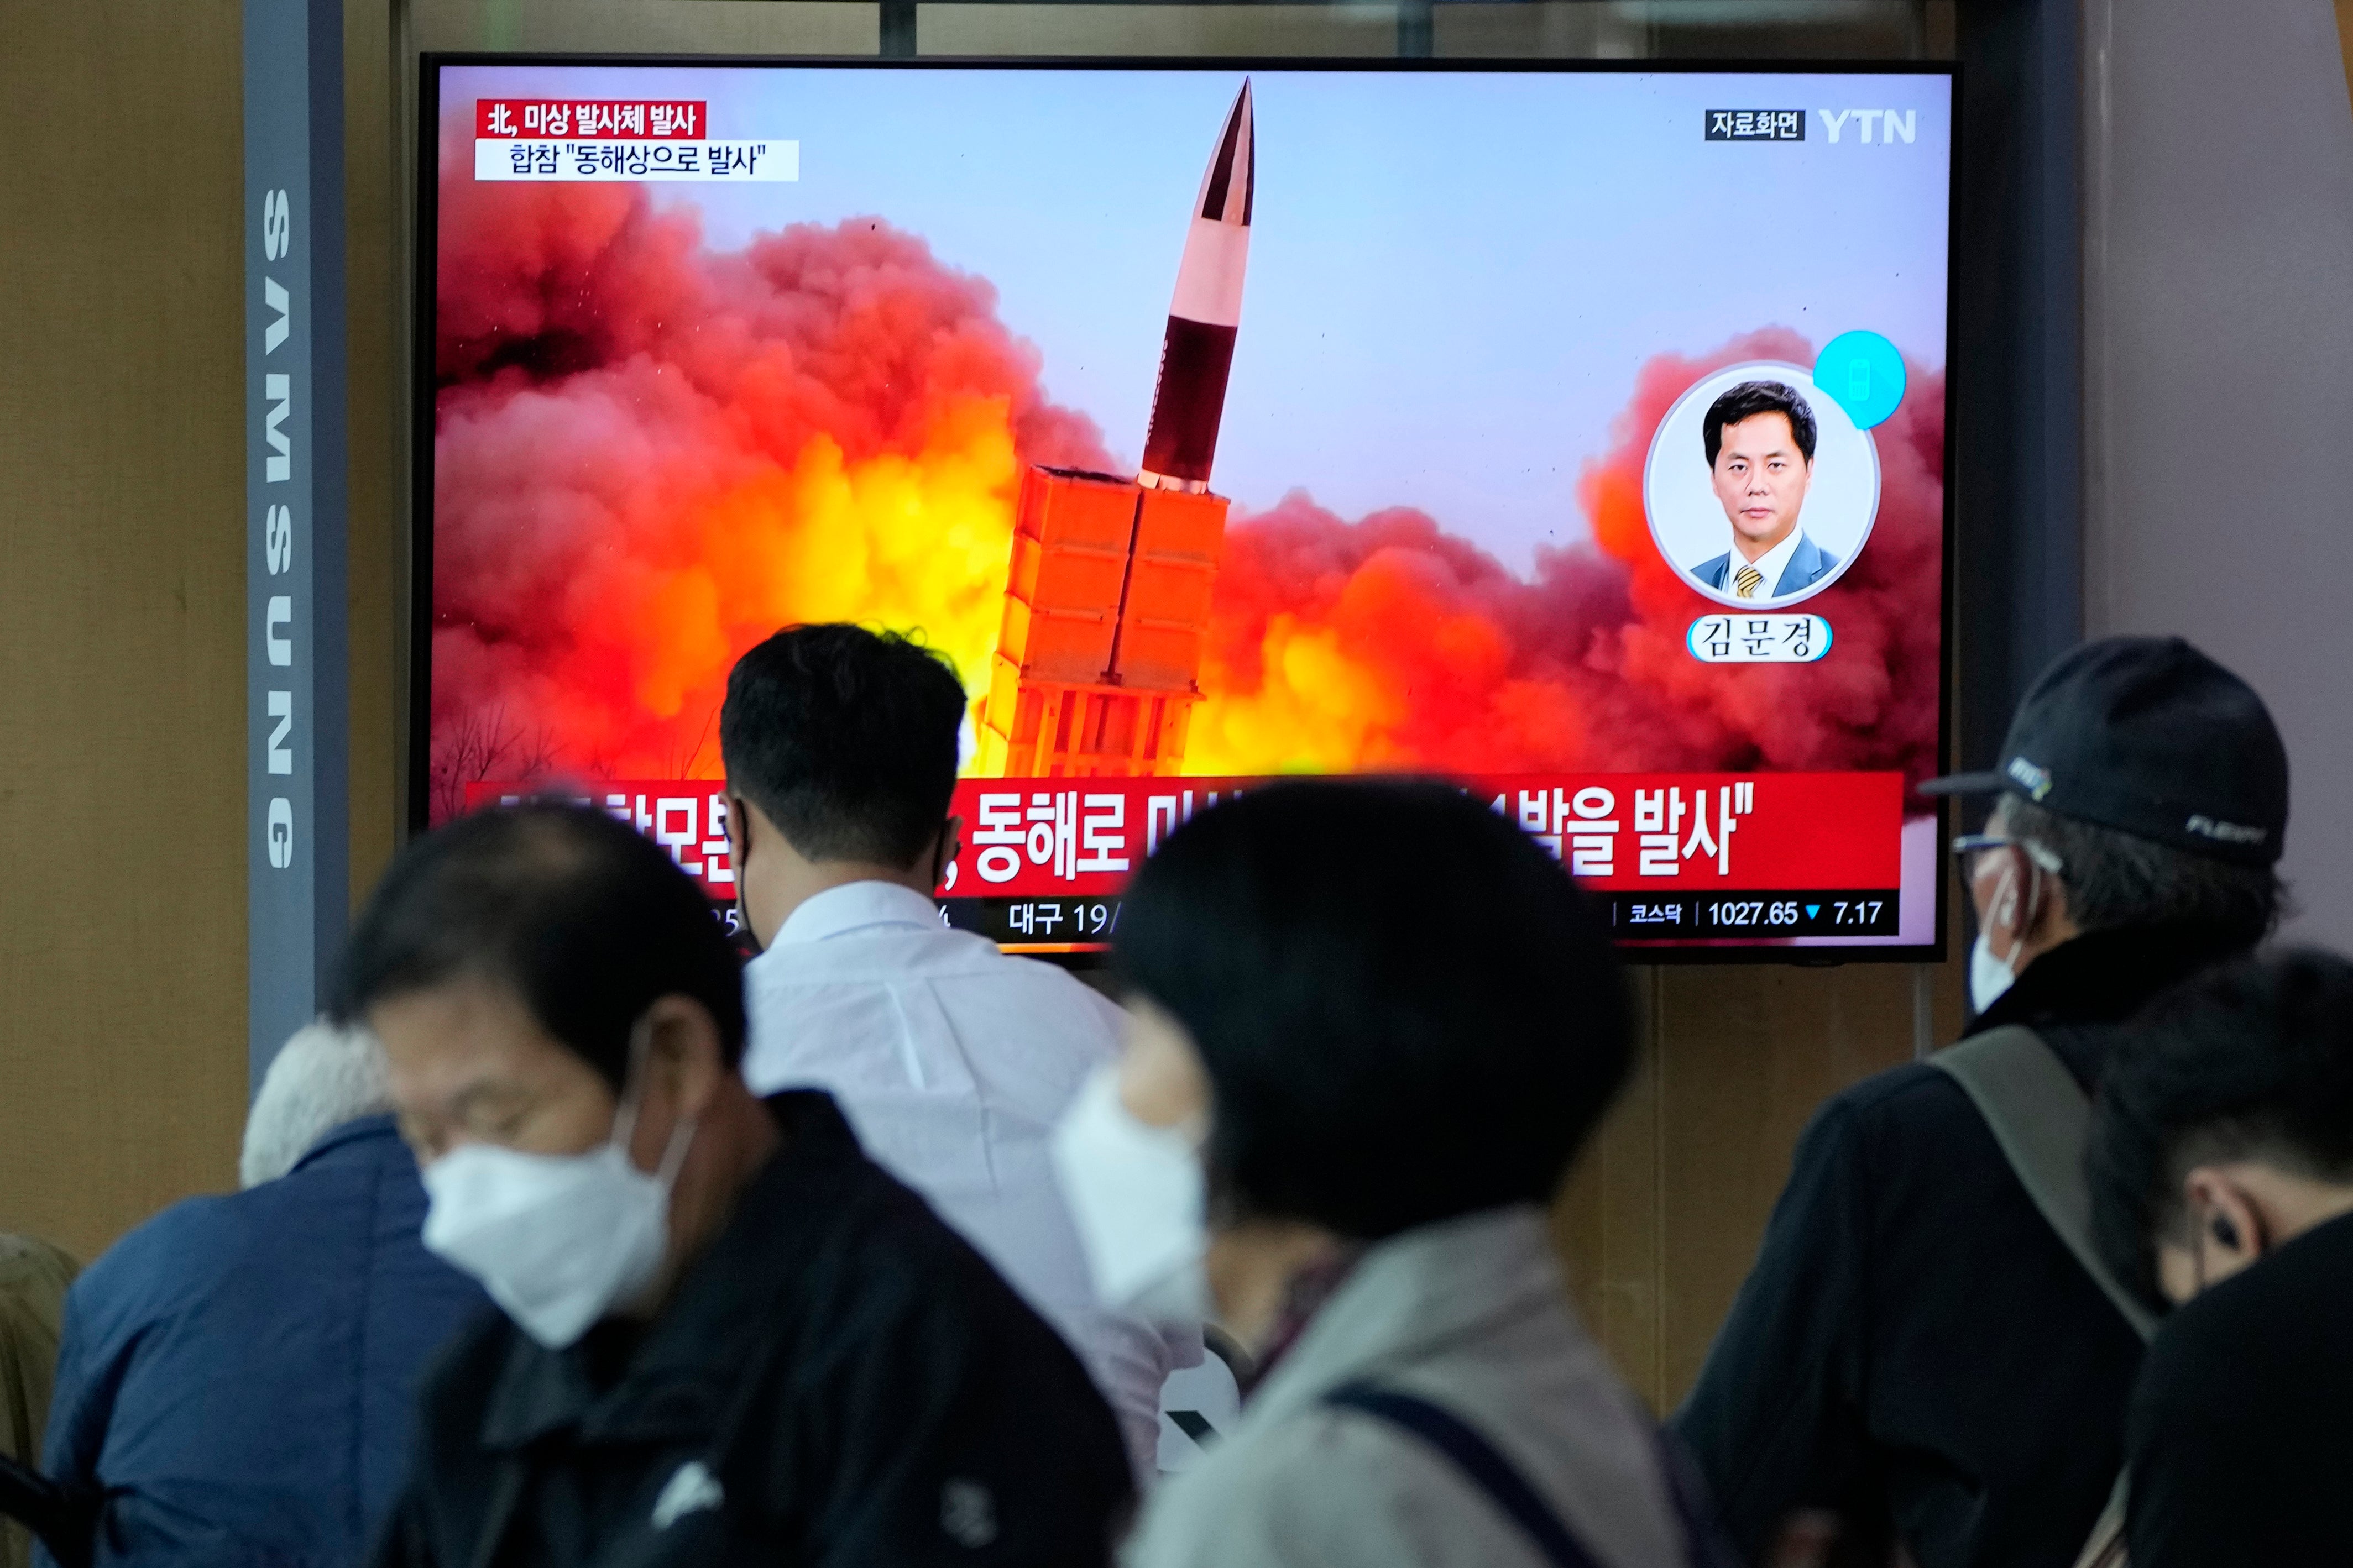 South Koreans watch a news program showing a file image of the North’s missile launch